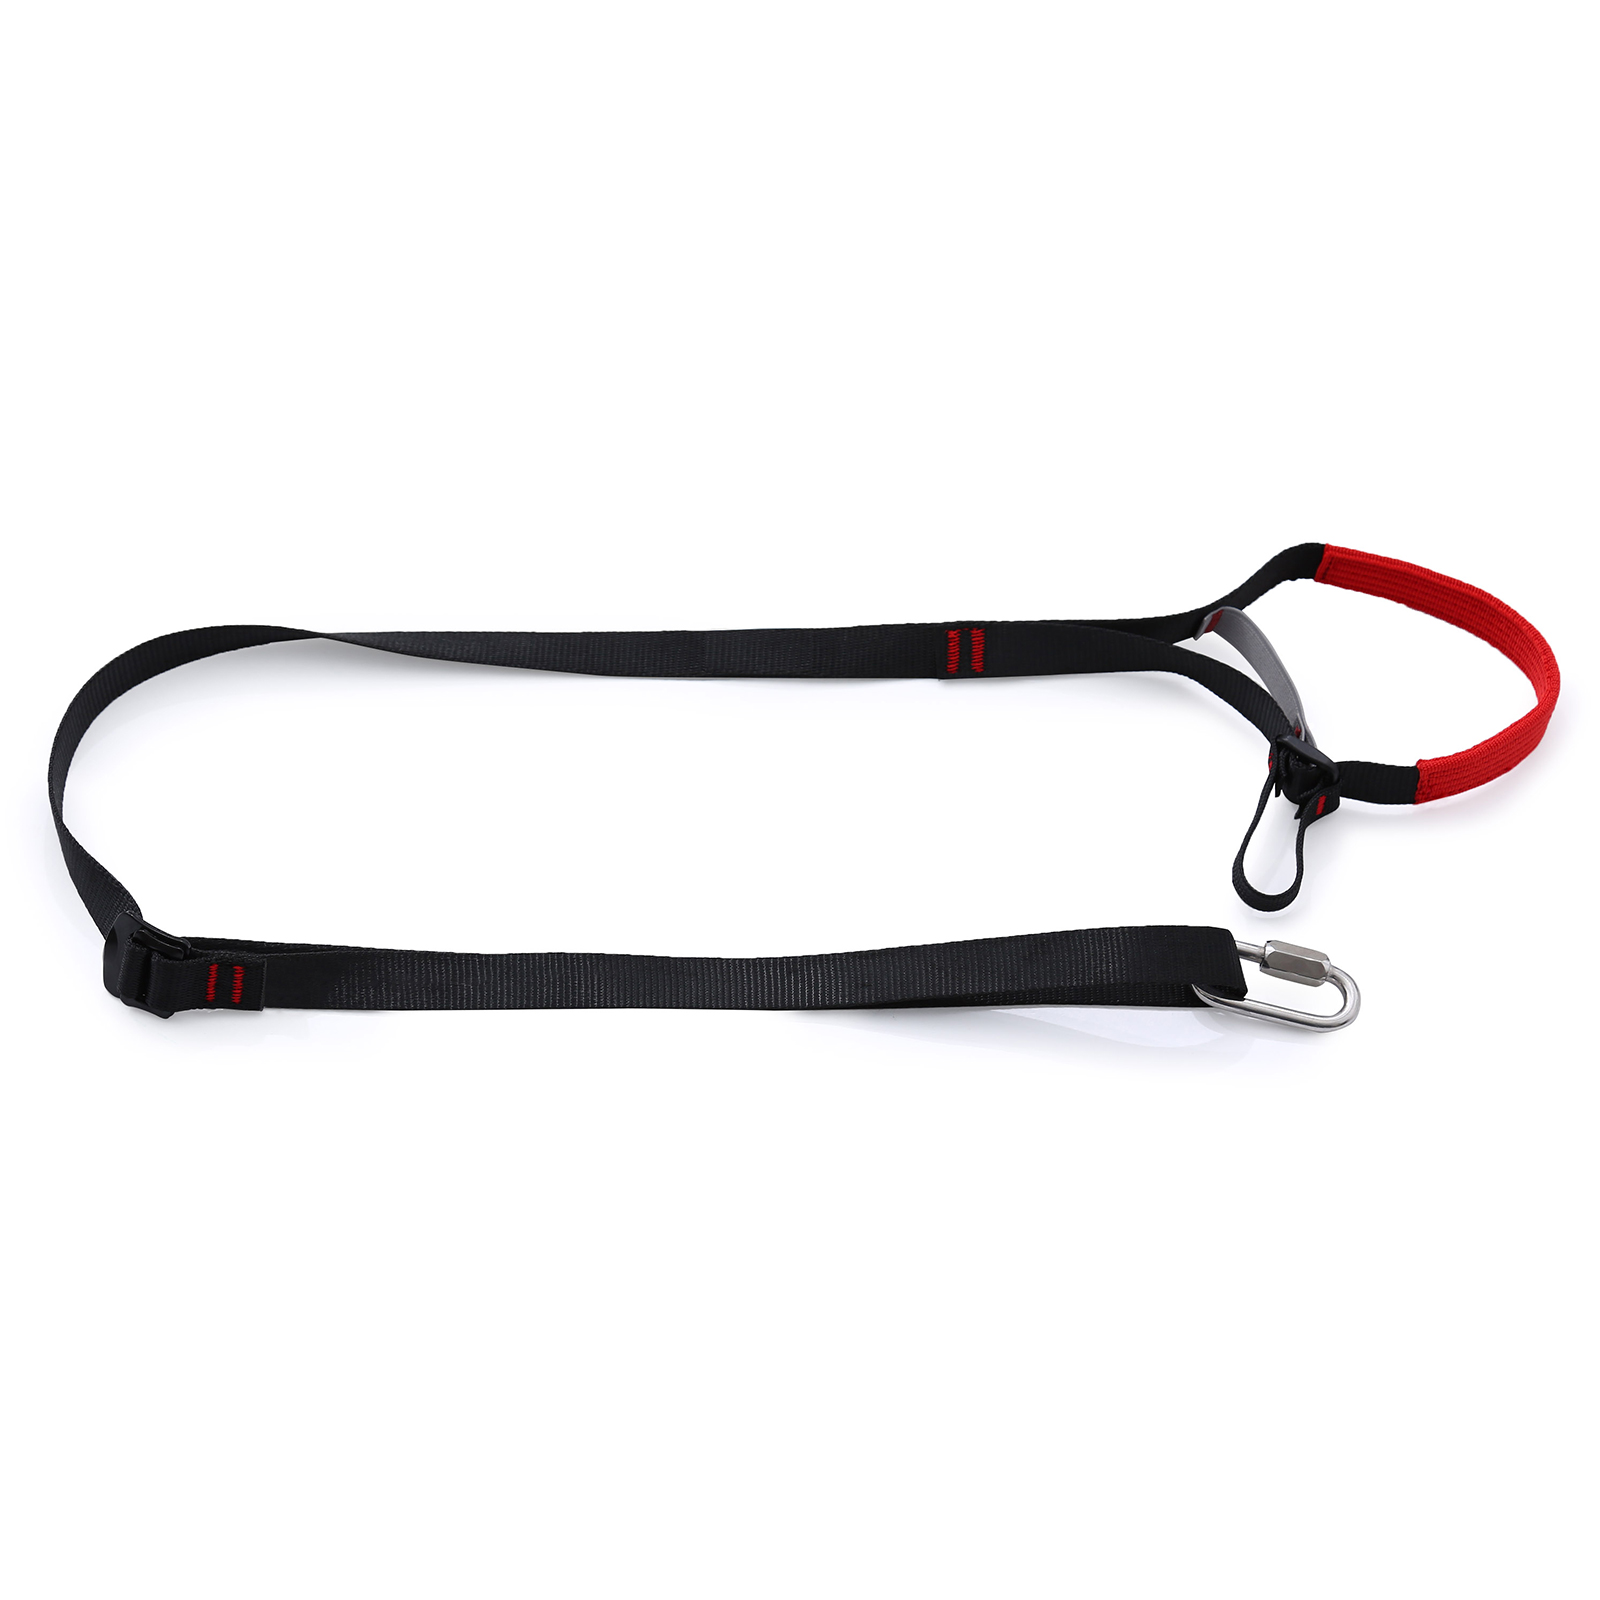 Adjustable Foot Loop Sling Ascender for Mountaineering Rock Climbing Caving 